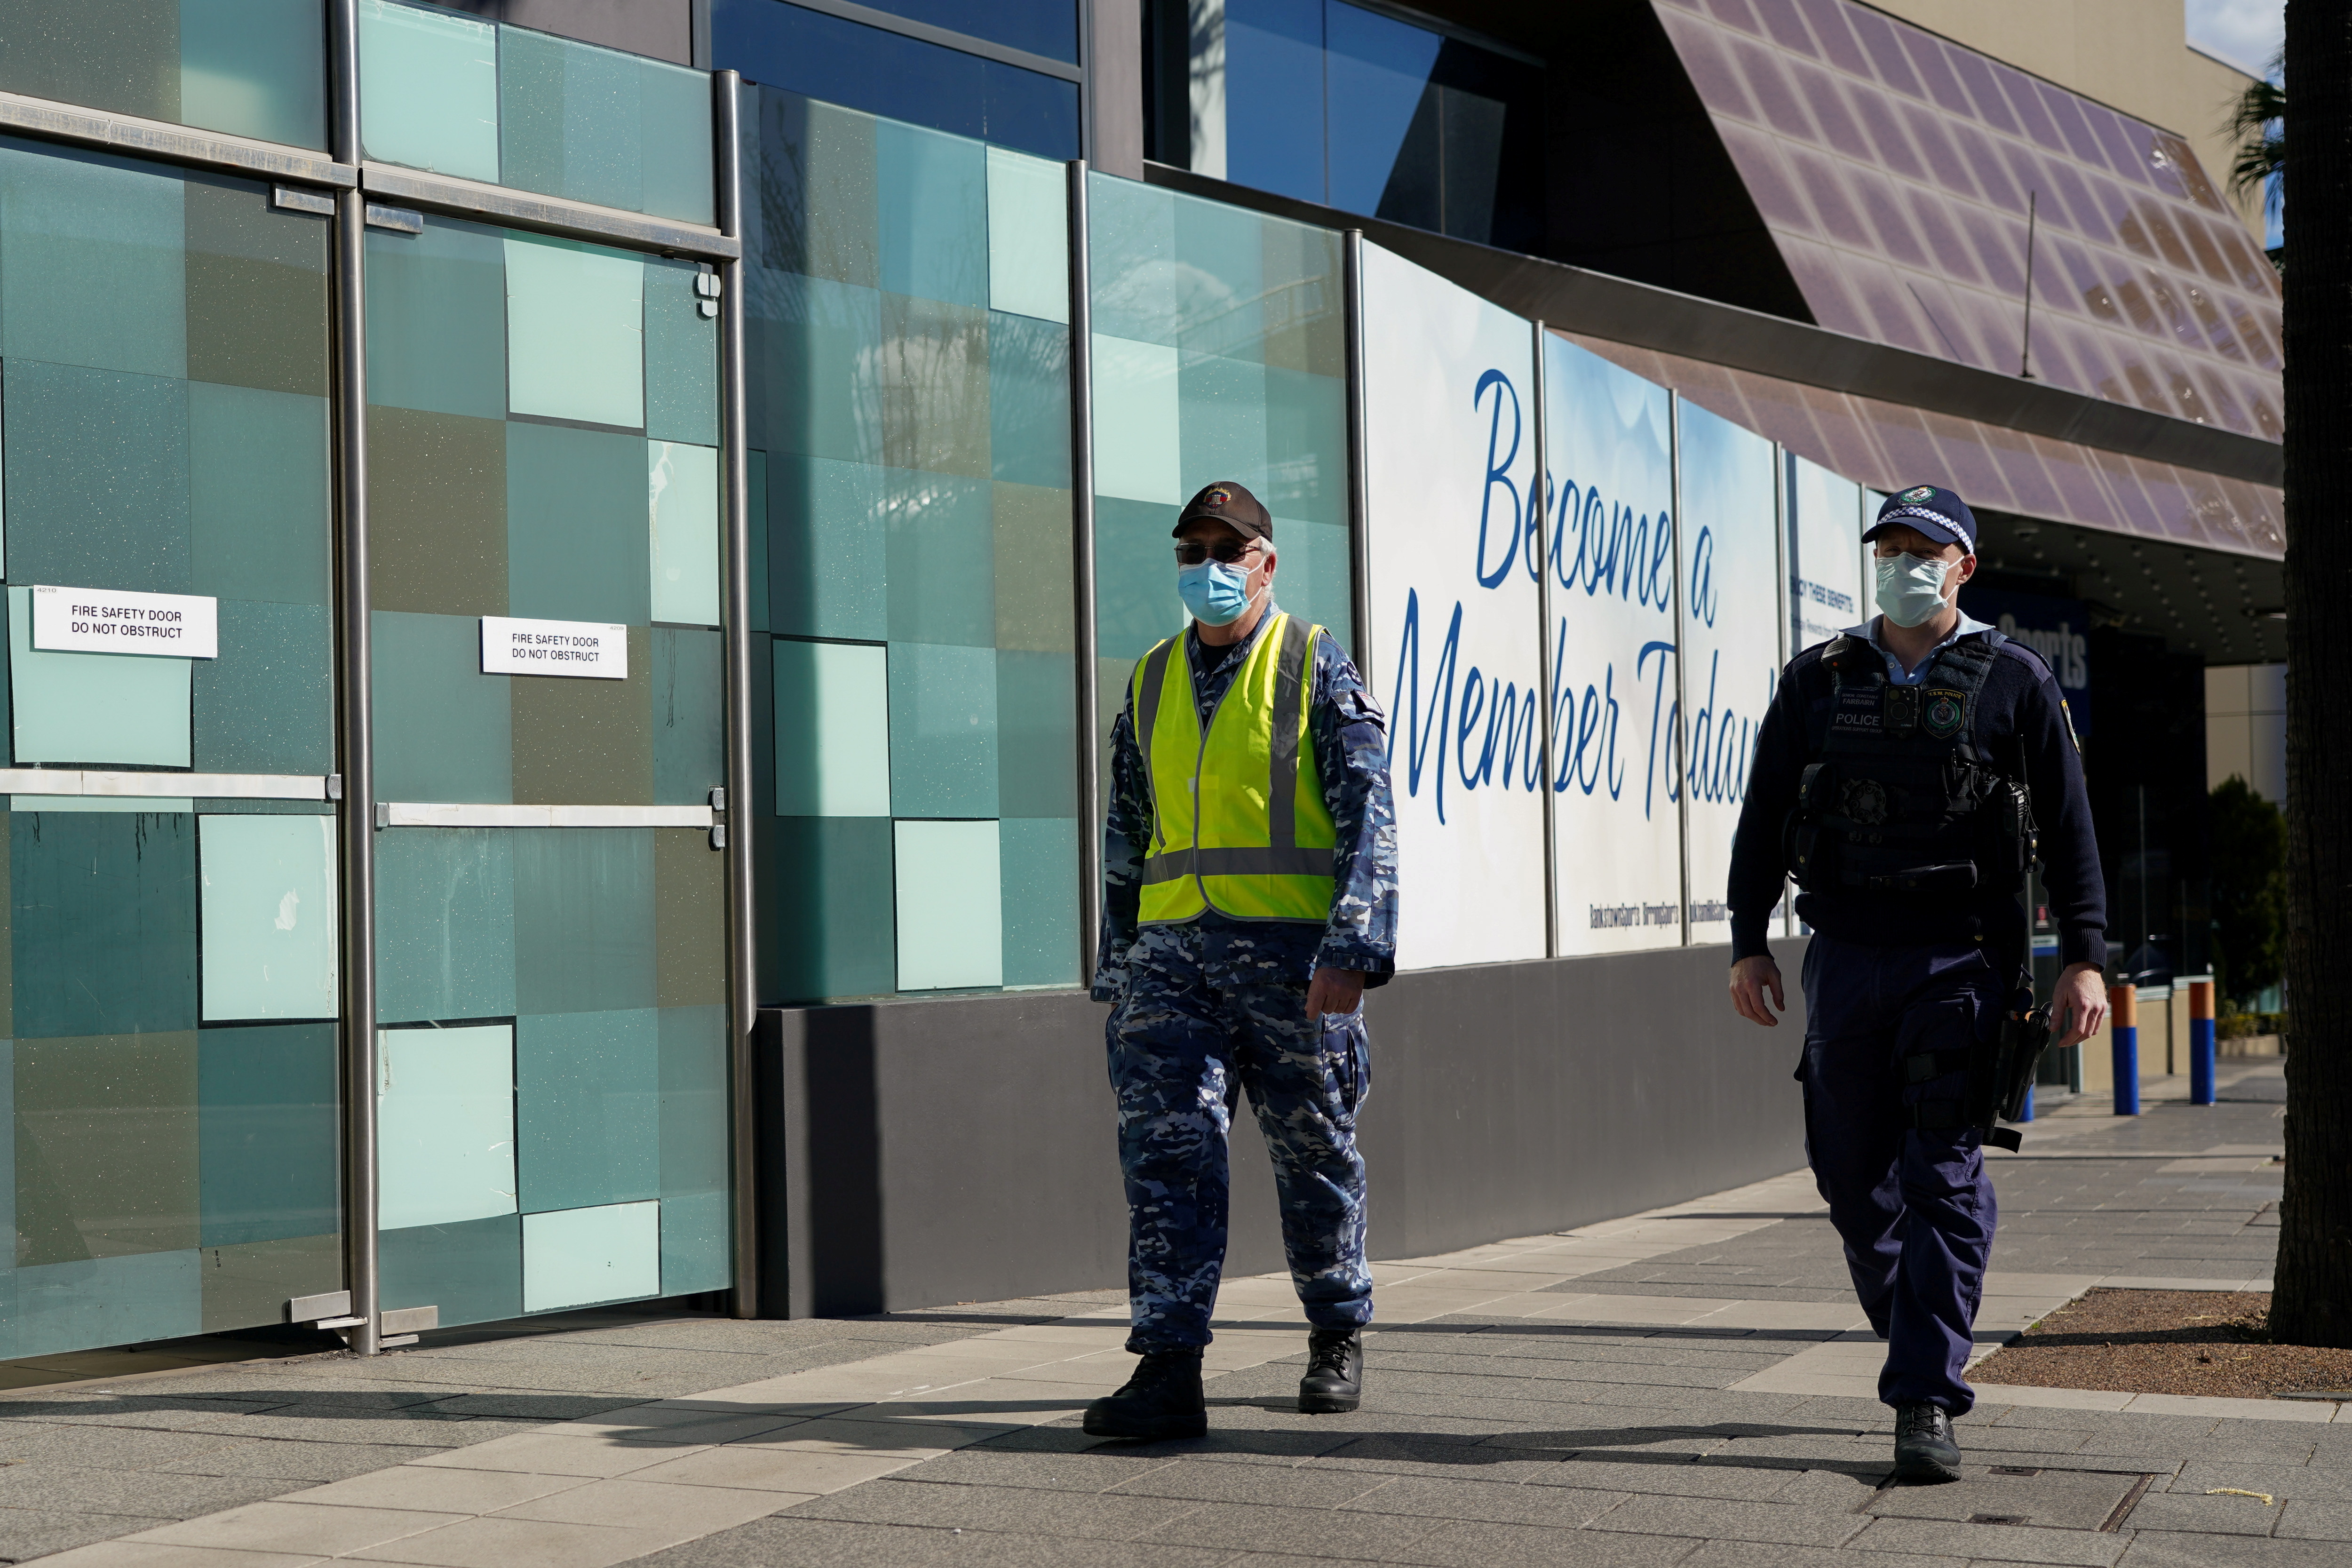 Personnel from the Australian Defence Force and New South Wales Police Force patrol a street in Sydney's Bankstown suburb during an outbreak of the coronavirus disease